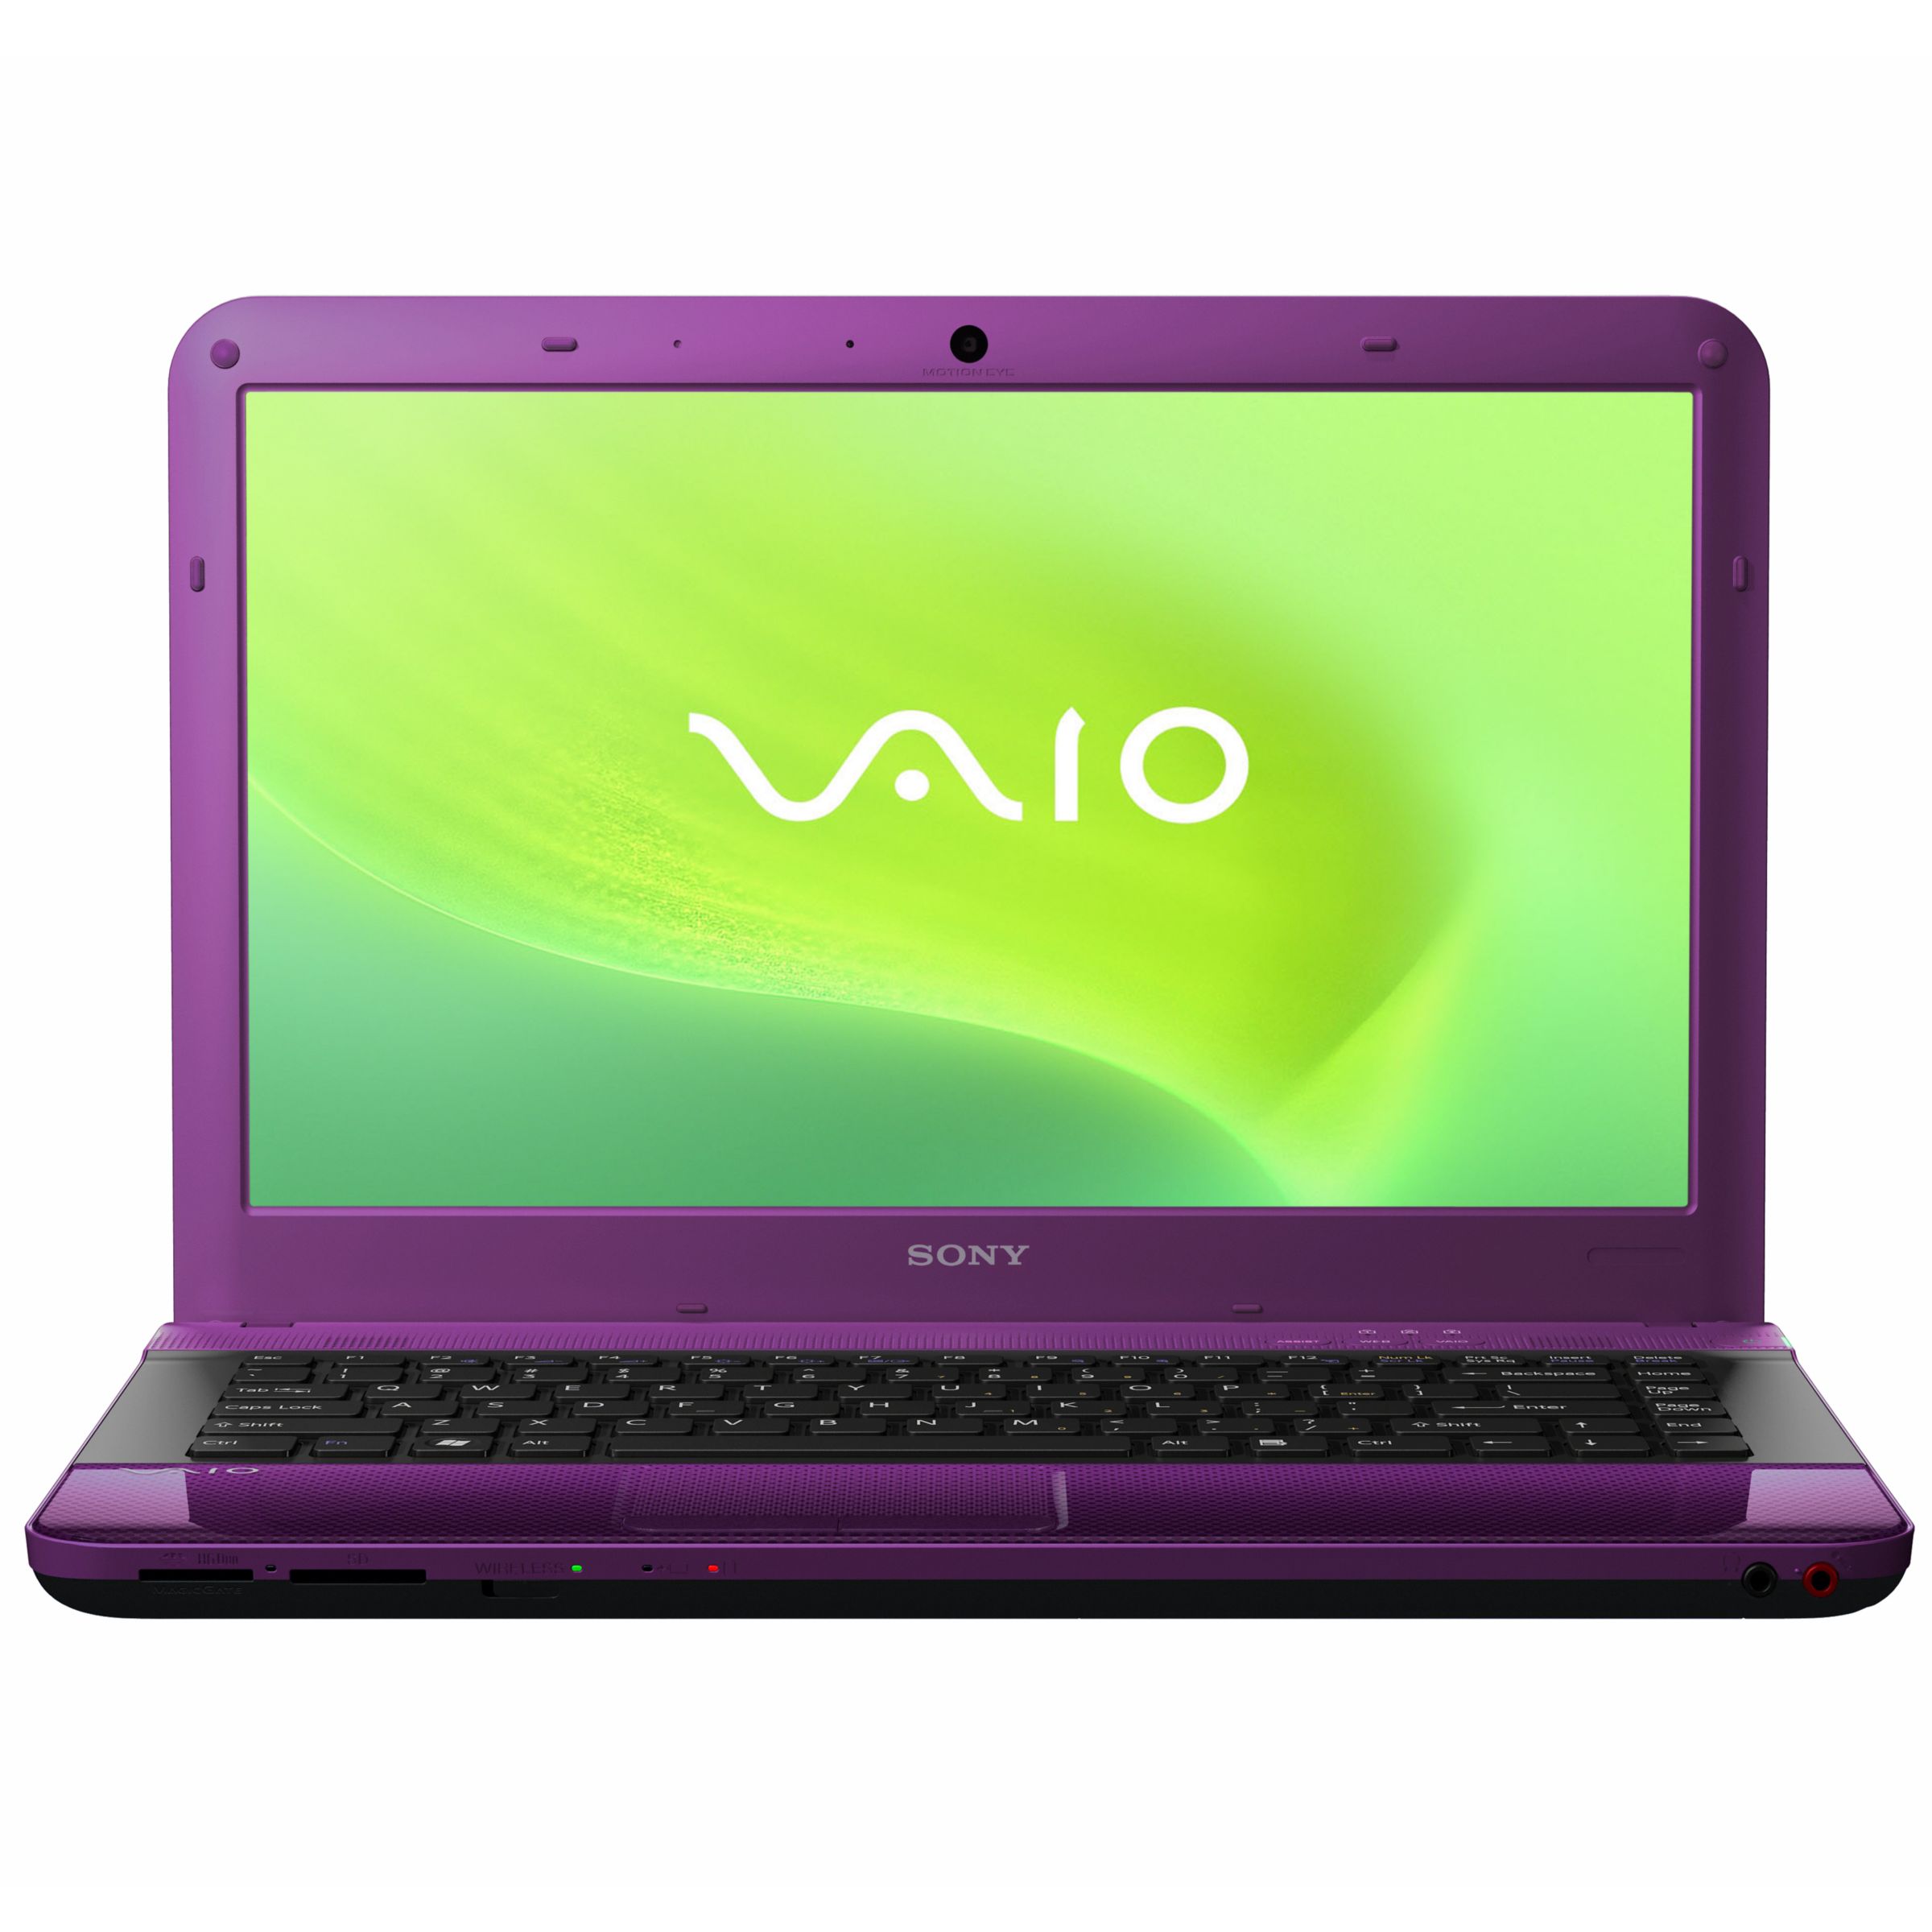 Sony Vaio VPC-EA3S1E/V Laptop, Intel Core i3, 500GB, 2.4GHz with 14 Inch Display, Violet at John Lewis